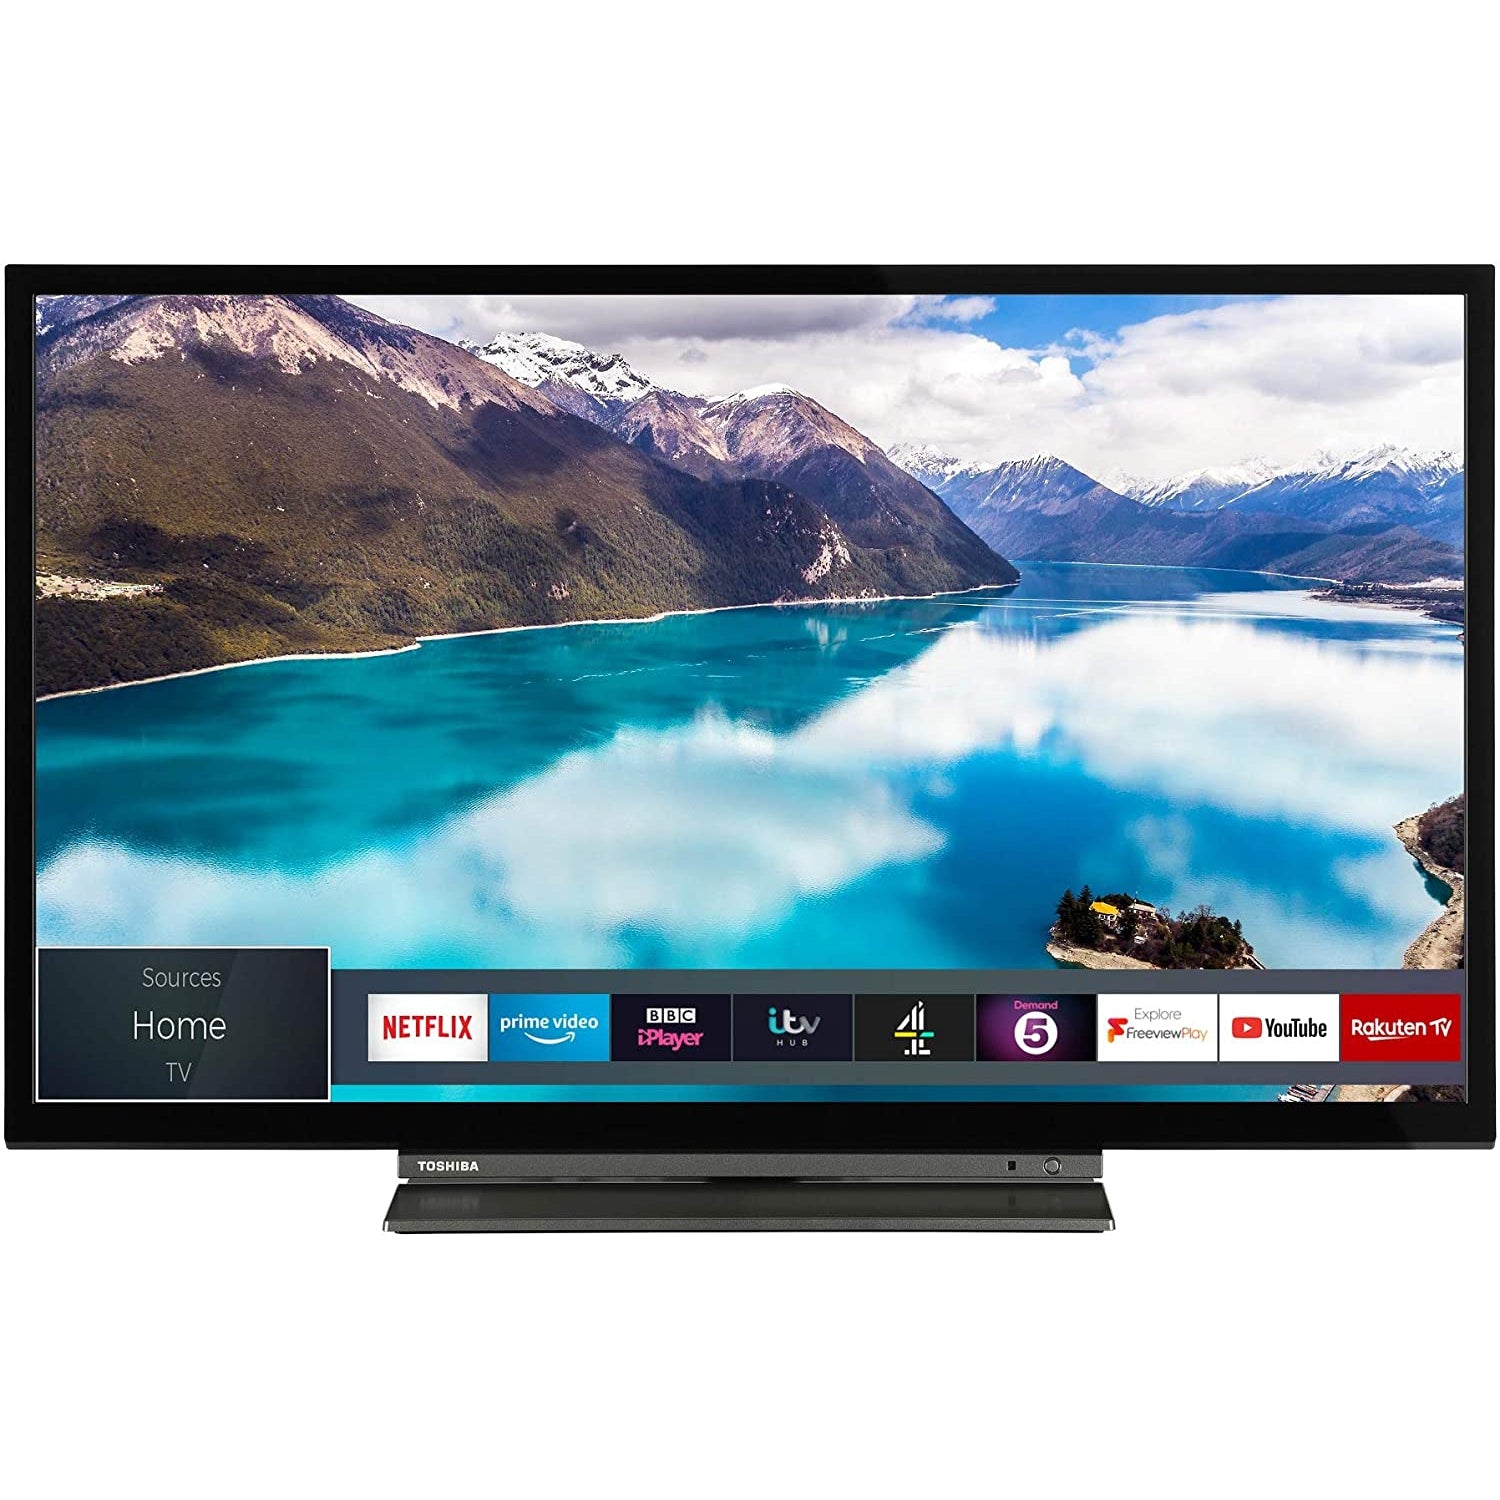 Toshiba 24WL3A63DB (2019) LED HD Ready 720p Smart TV, 24” with Freeview Play, Black